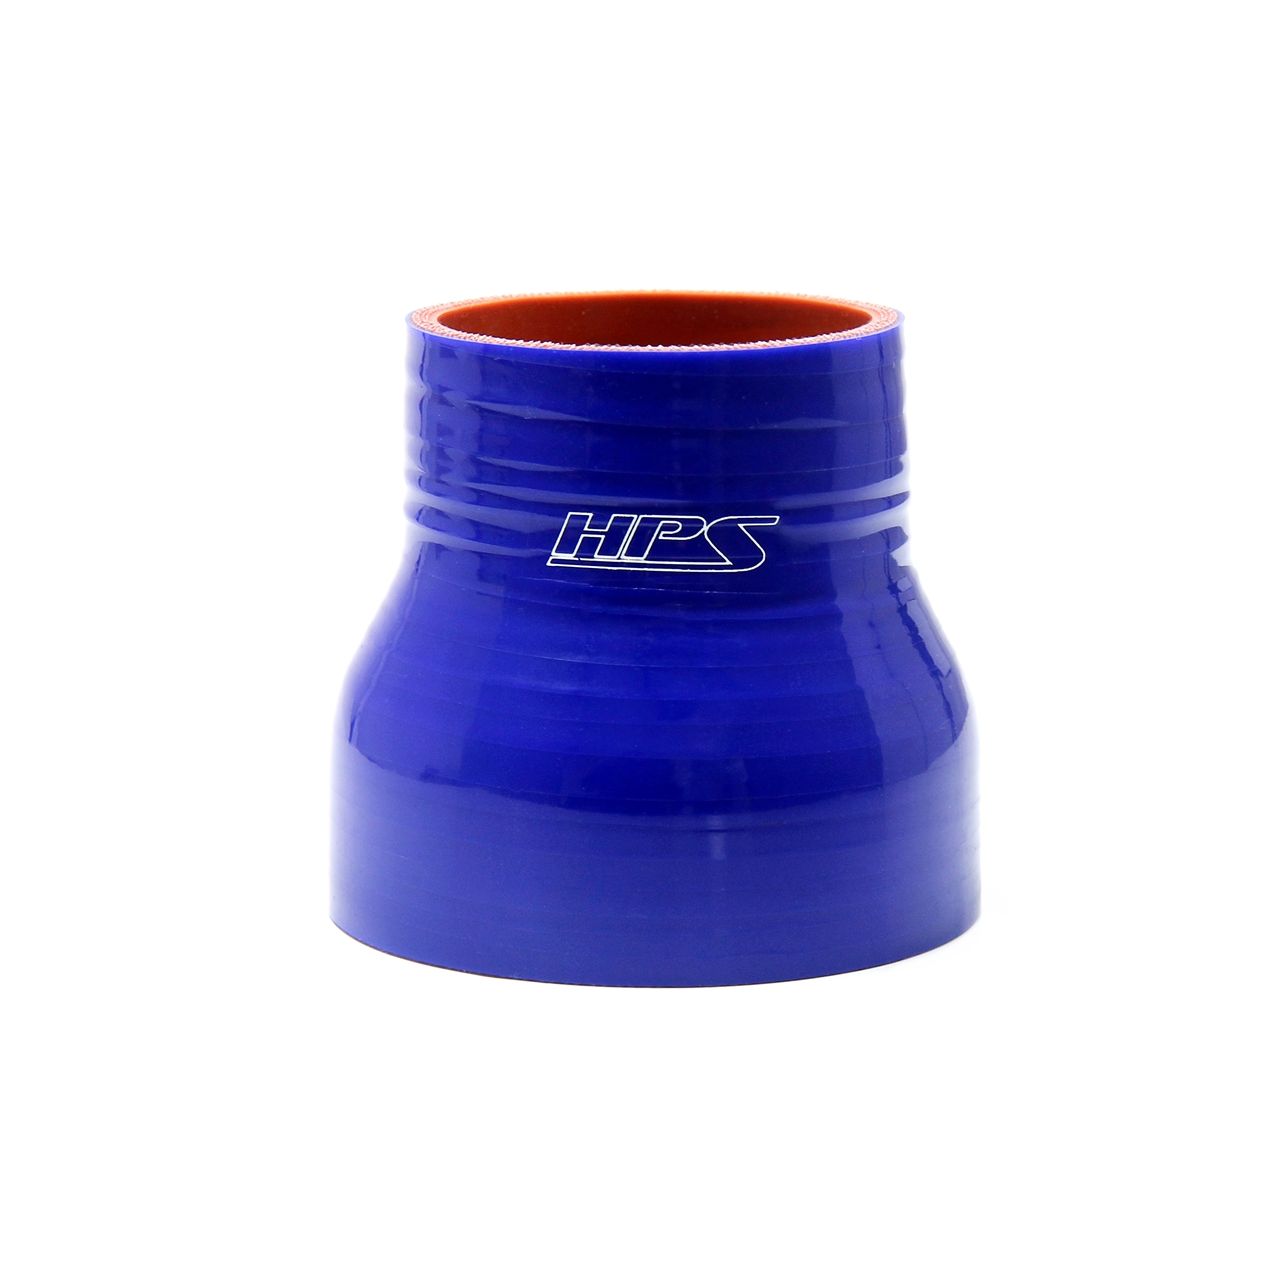 HPS 2.25" - 3" ID , 3" Long High Temp 4-ply Reinforced Silicone Reducer Coupler Hose Blue (57mm - 76mm ID , 76mm Length)